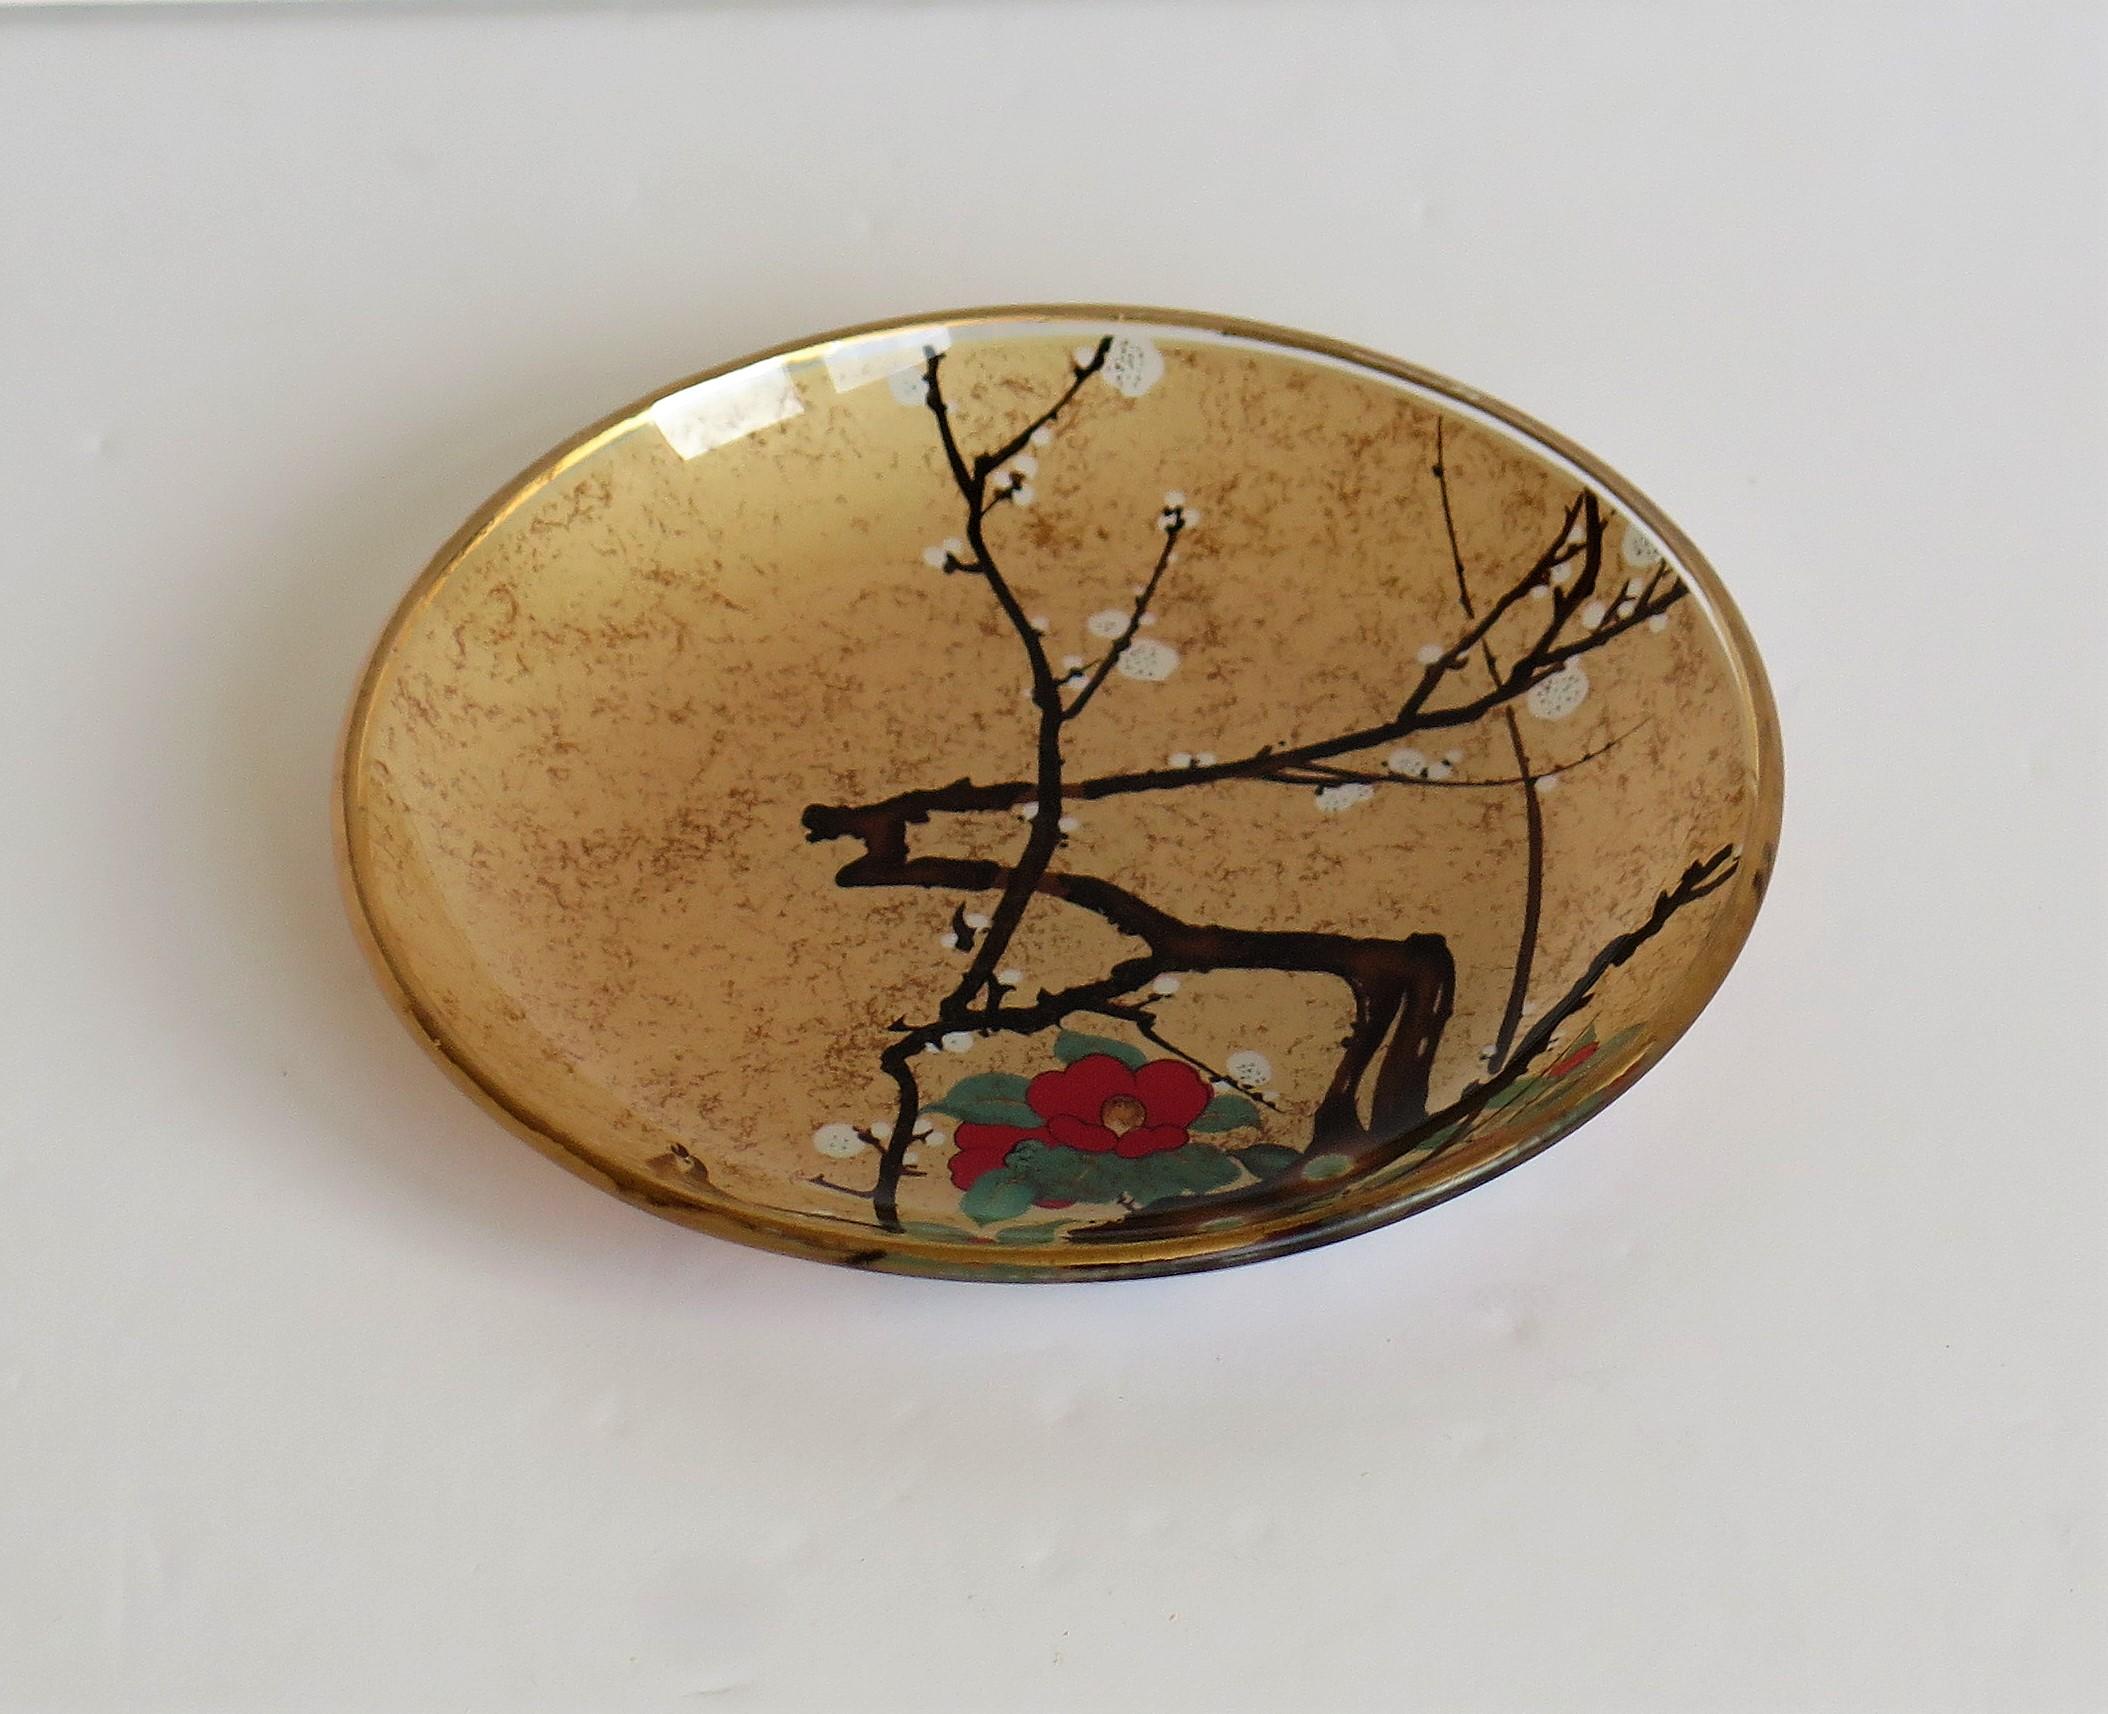 20th Century Small Japanese Glass Dish with Hand Painted Kakiemon Decoration, circa 1920